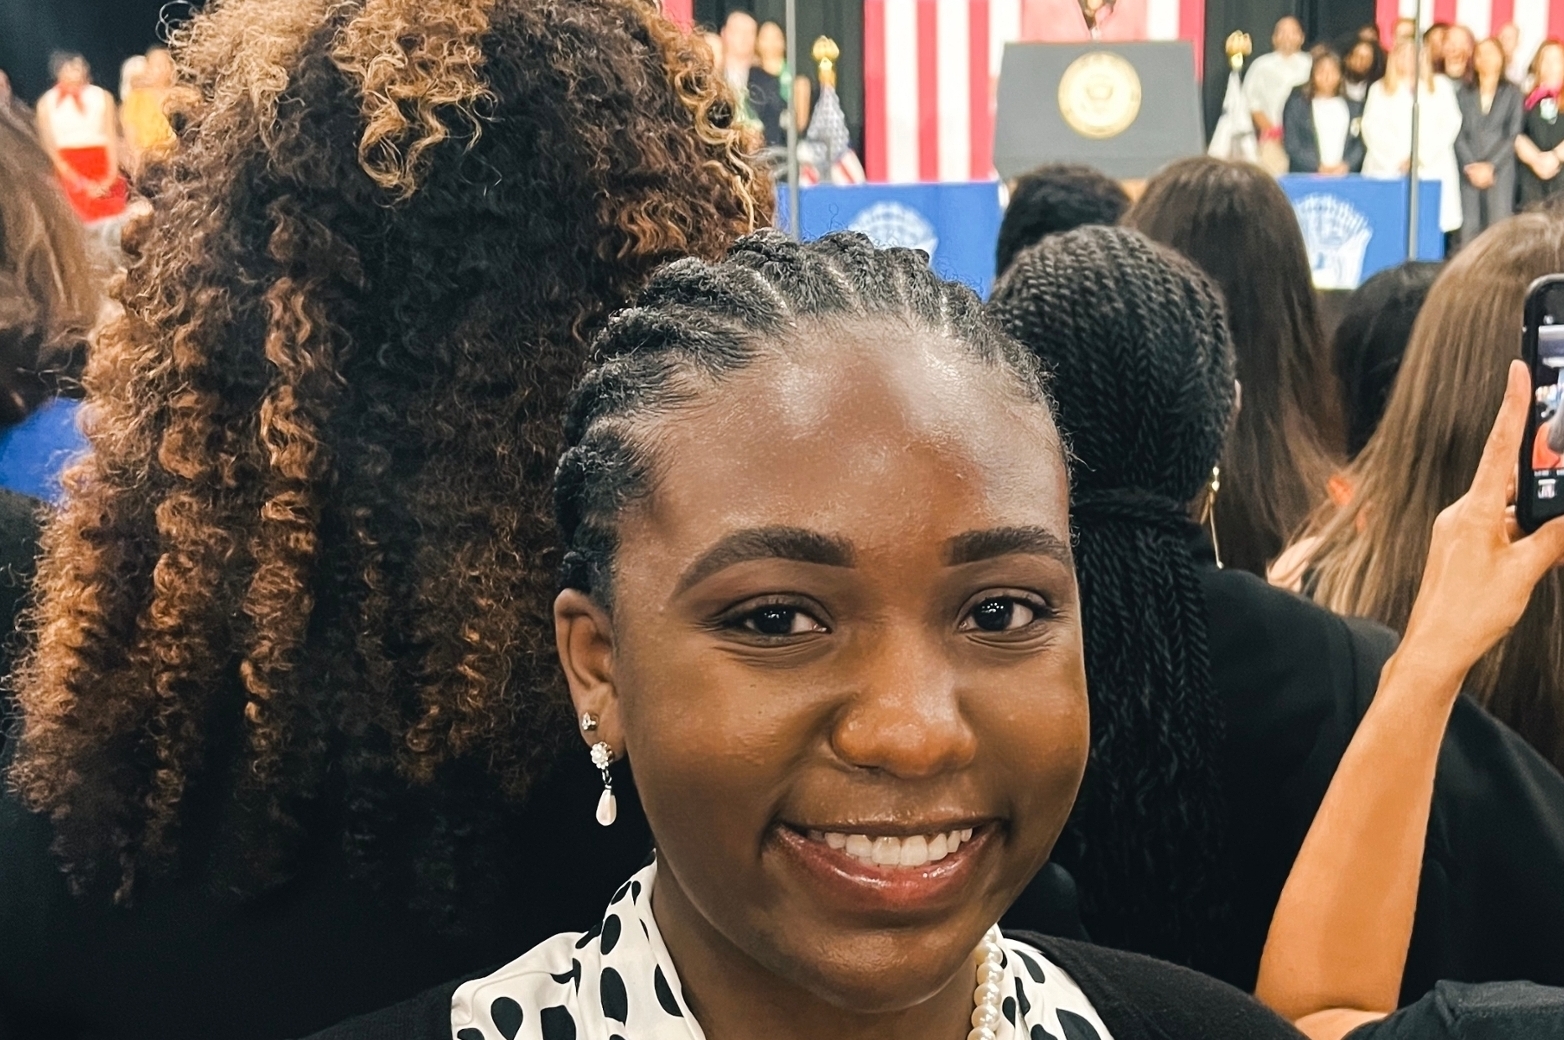 N.C. A&T Student Gains Insights into Politics, Public Service during Internship with Adams